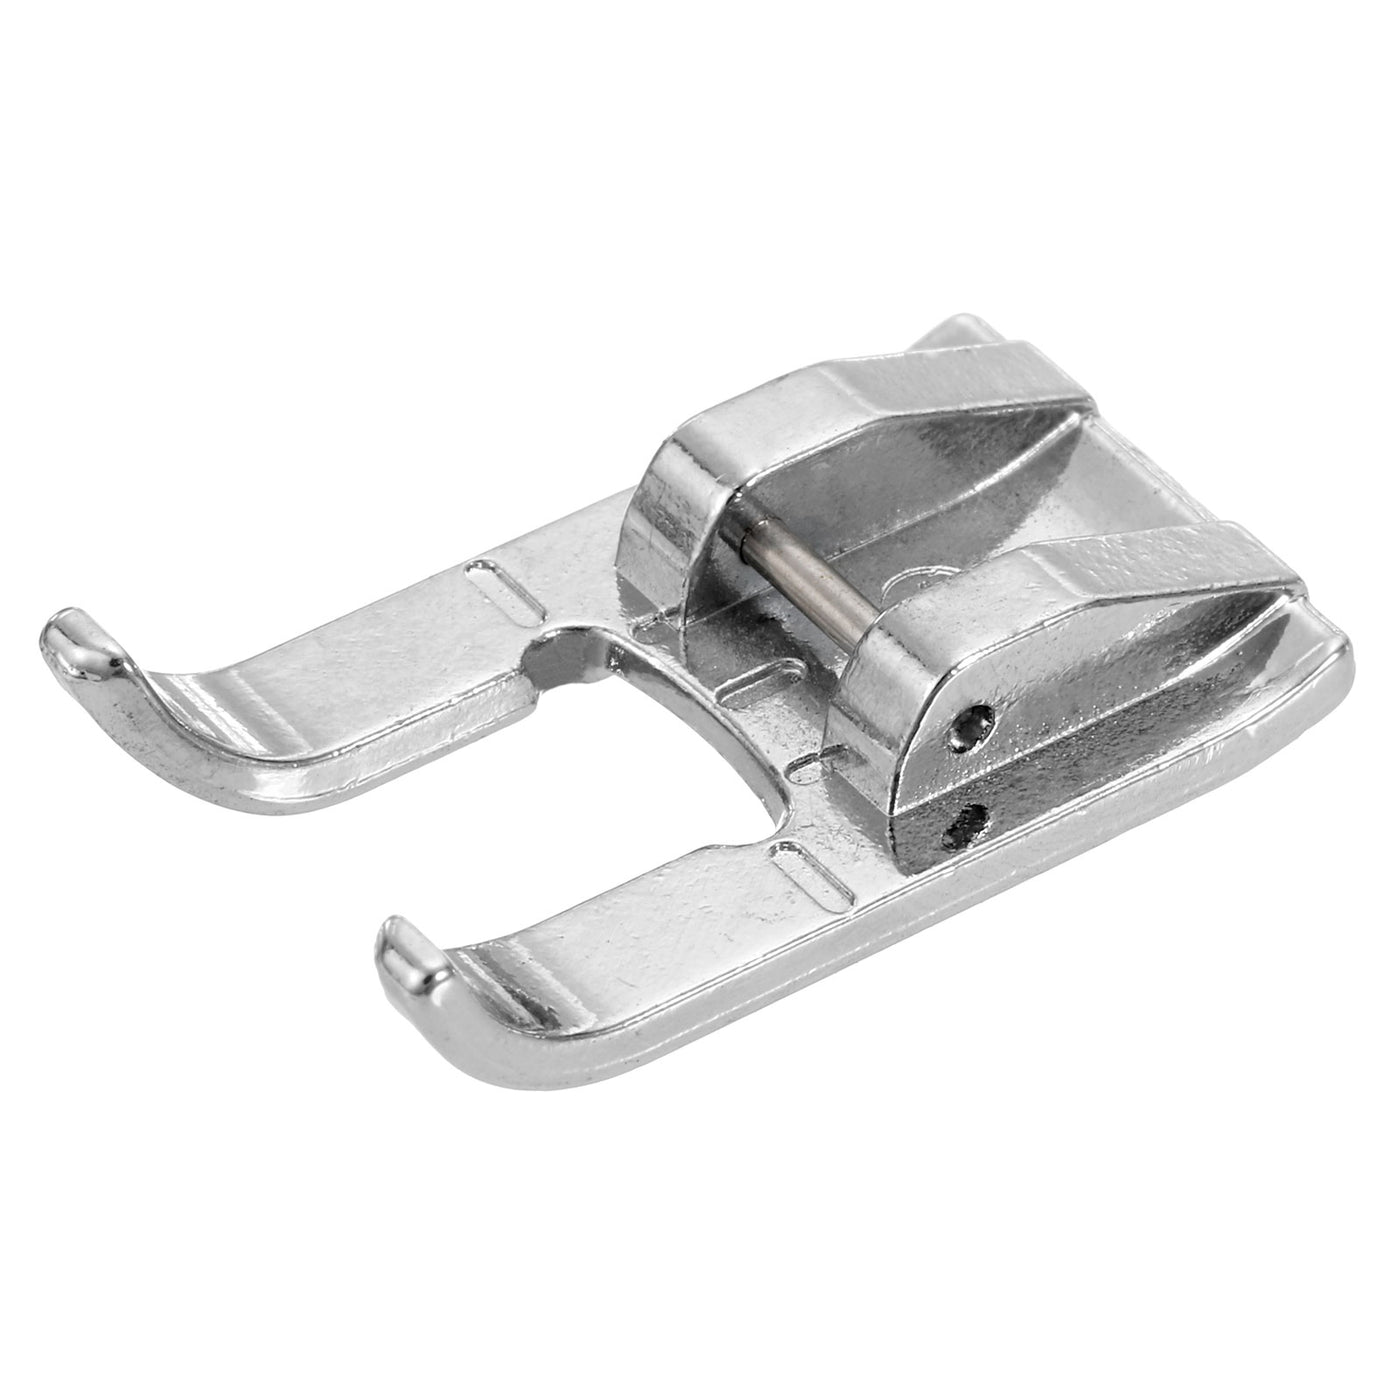 uxcell Uxcell Open Toe Foot Sewing Machine Foot Galvanized Iron Presser Foot